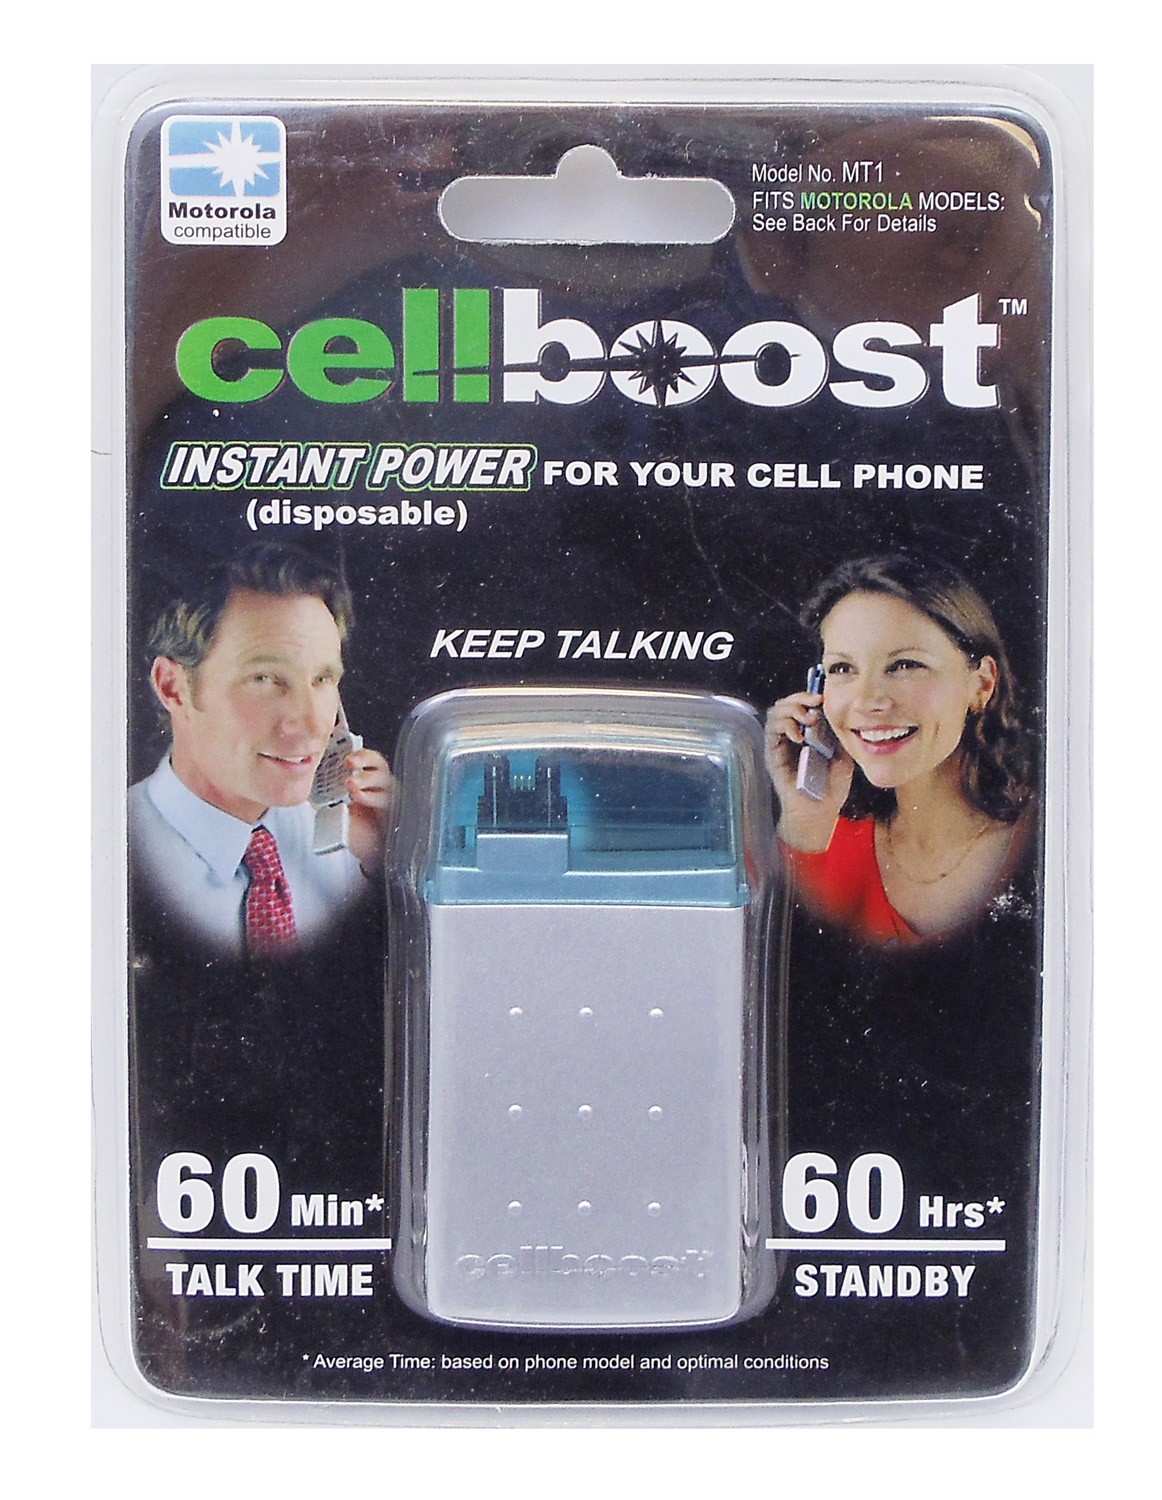 Cellboost - Provides Instant Power Up To 60 Minutes Talk Time & 60 Hours Standby For Motorola And Other T Series Phones